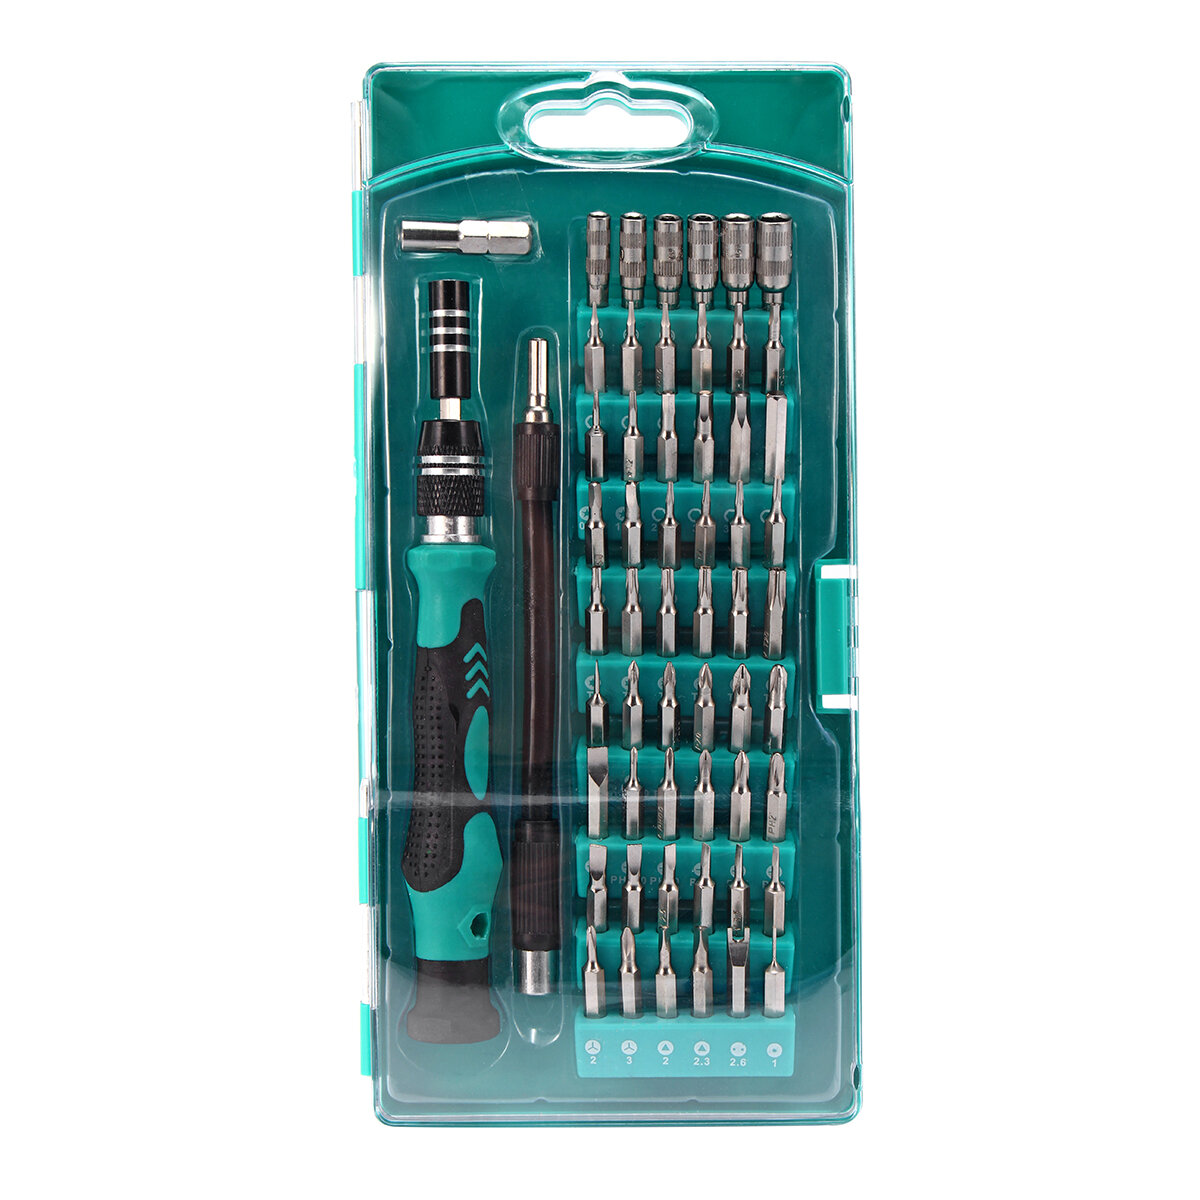 

58 In 1 Multi-function Precision Screwdriver Kit with 54 Bits for Phone Watch Sun Glassess Repair Tool, Blue green